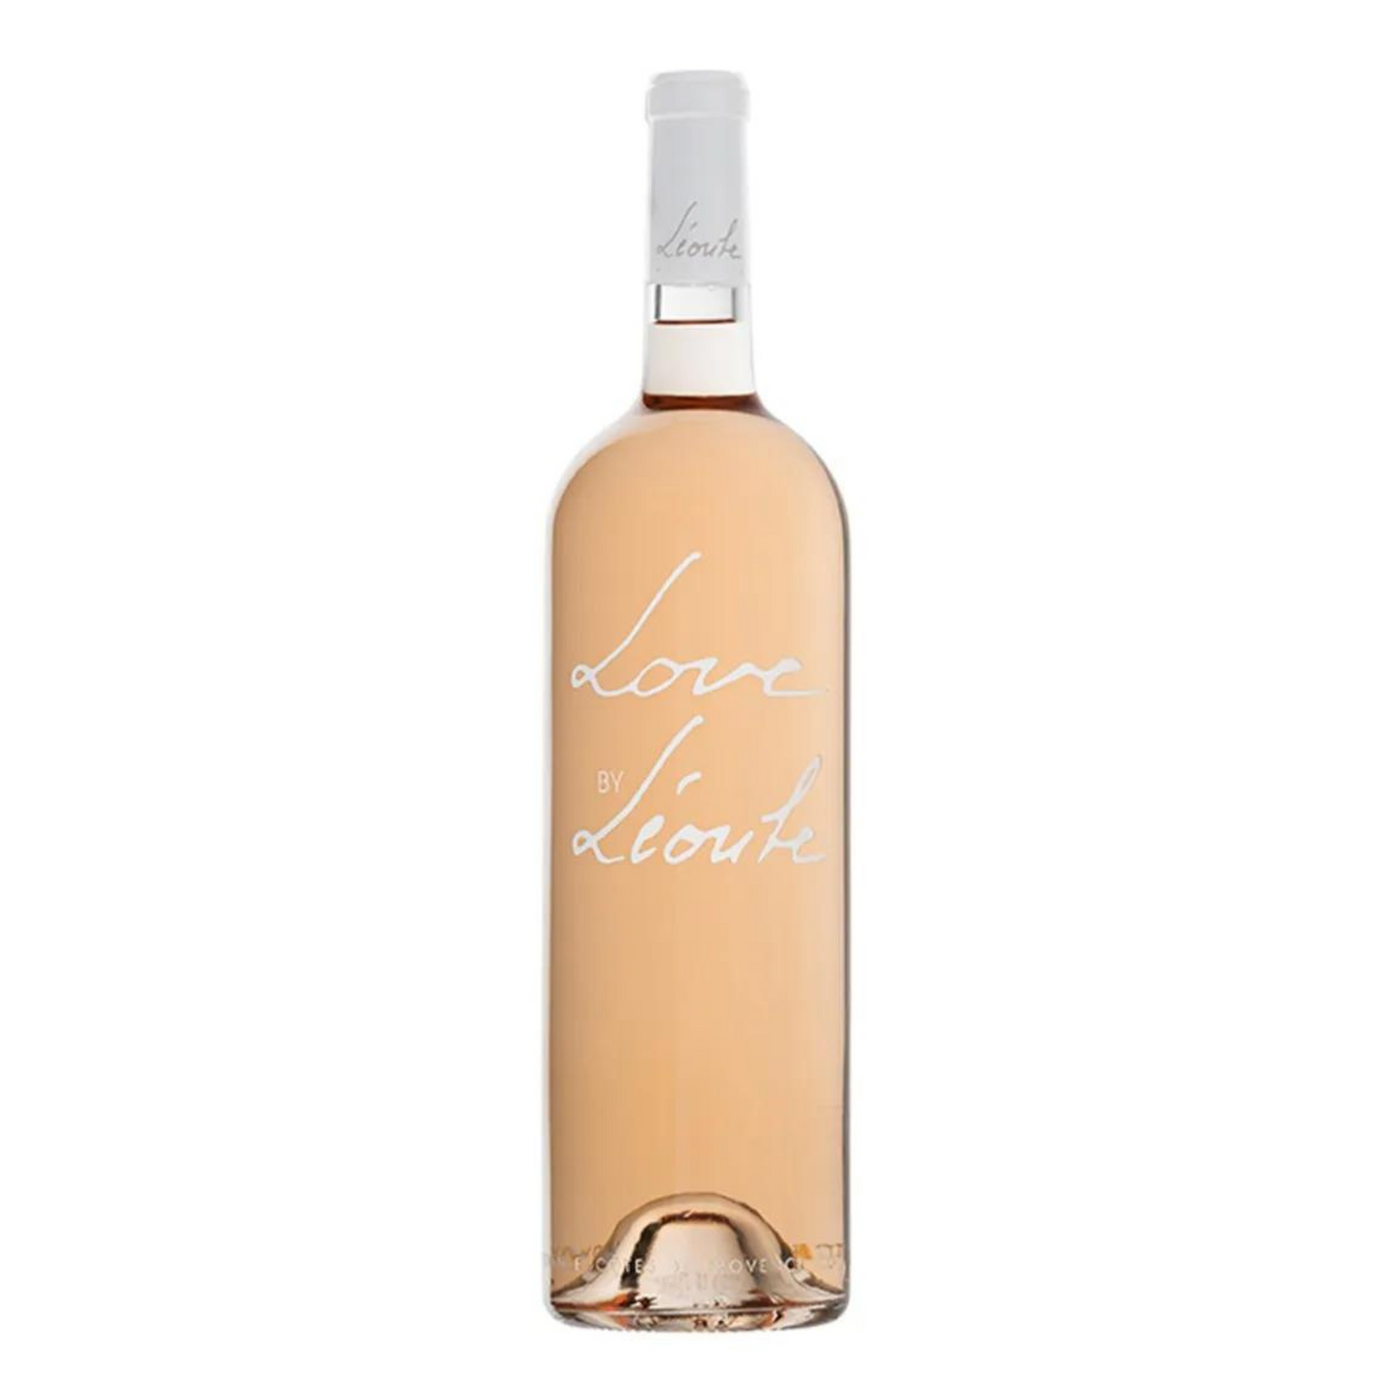 Love by Leoube Provence Ros? Magnum